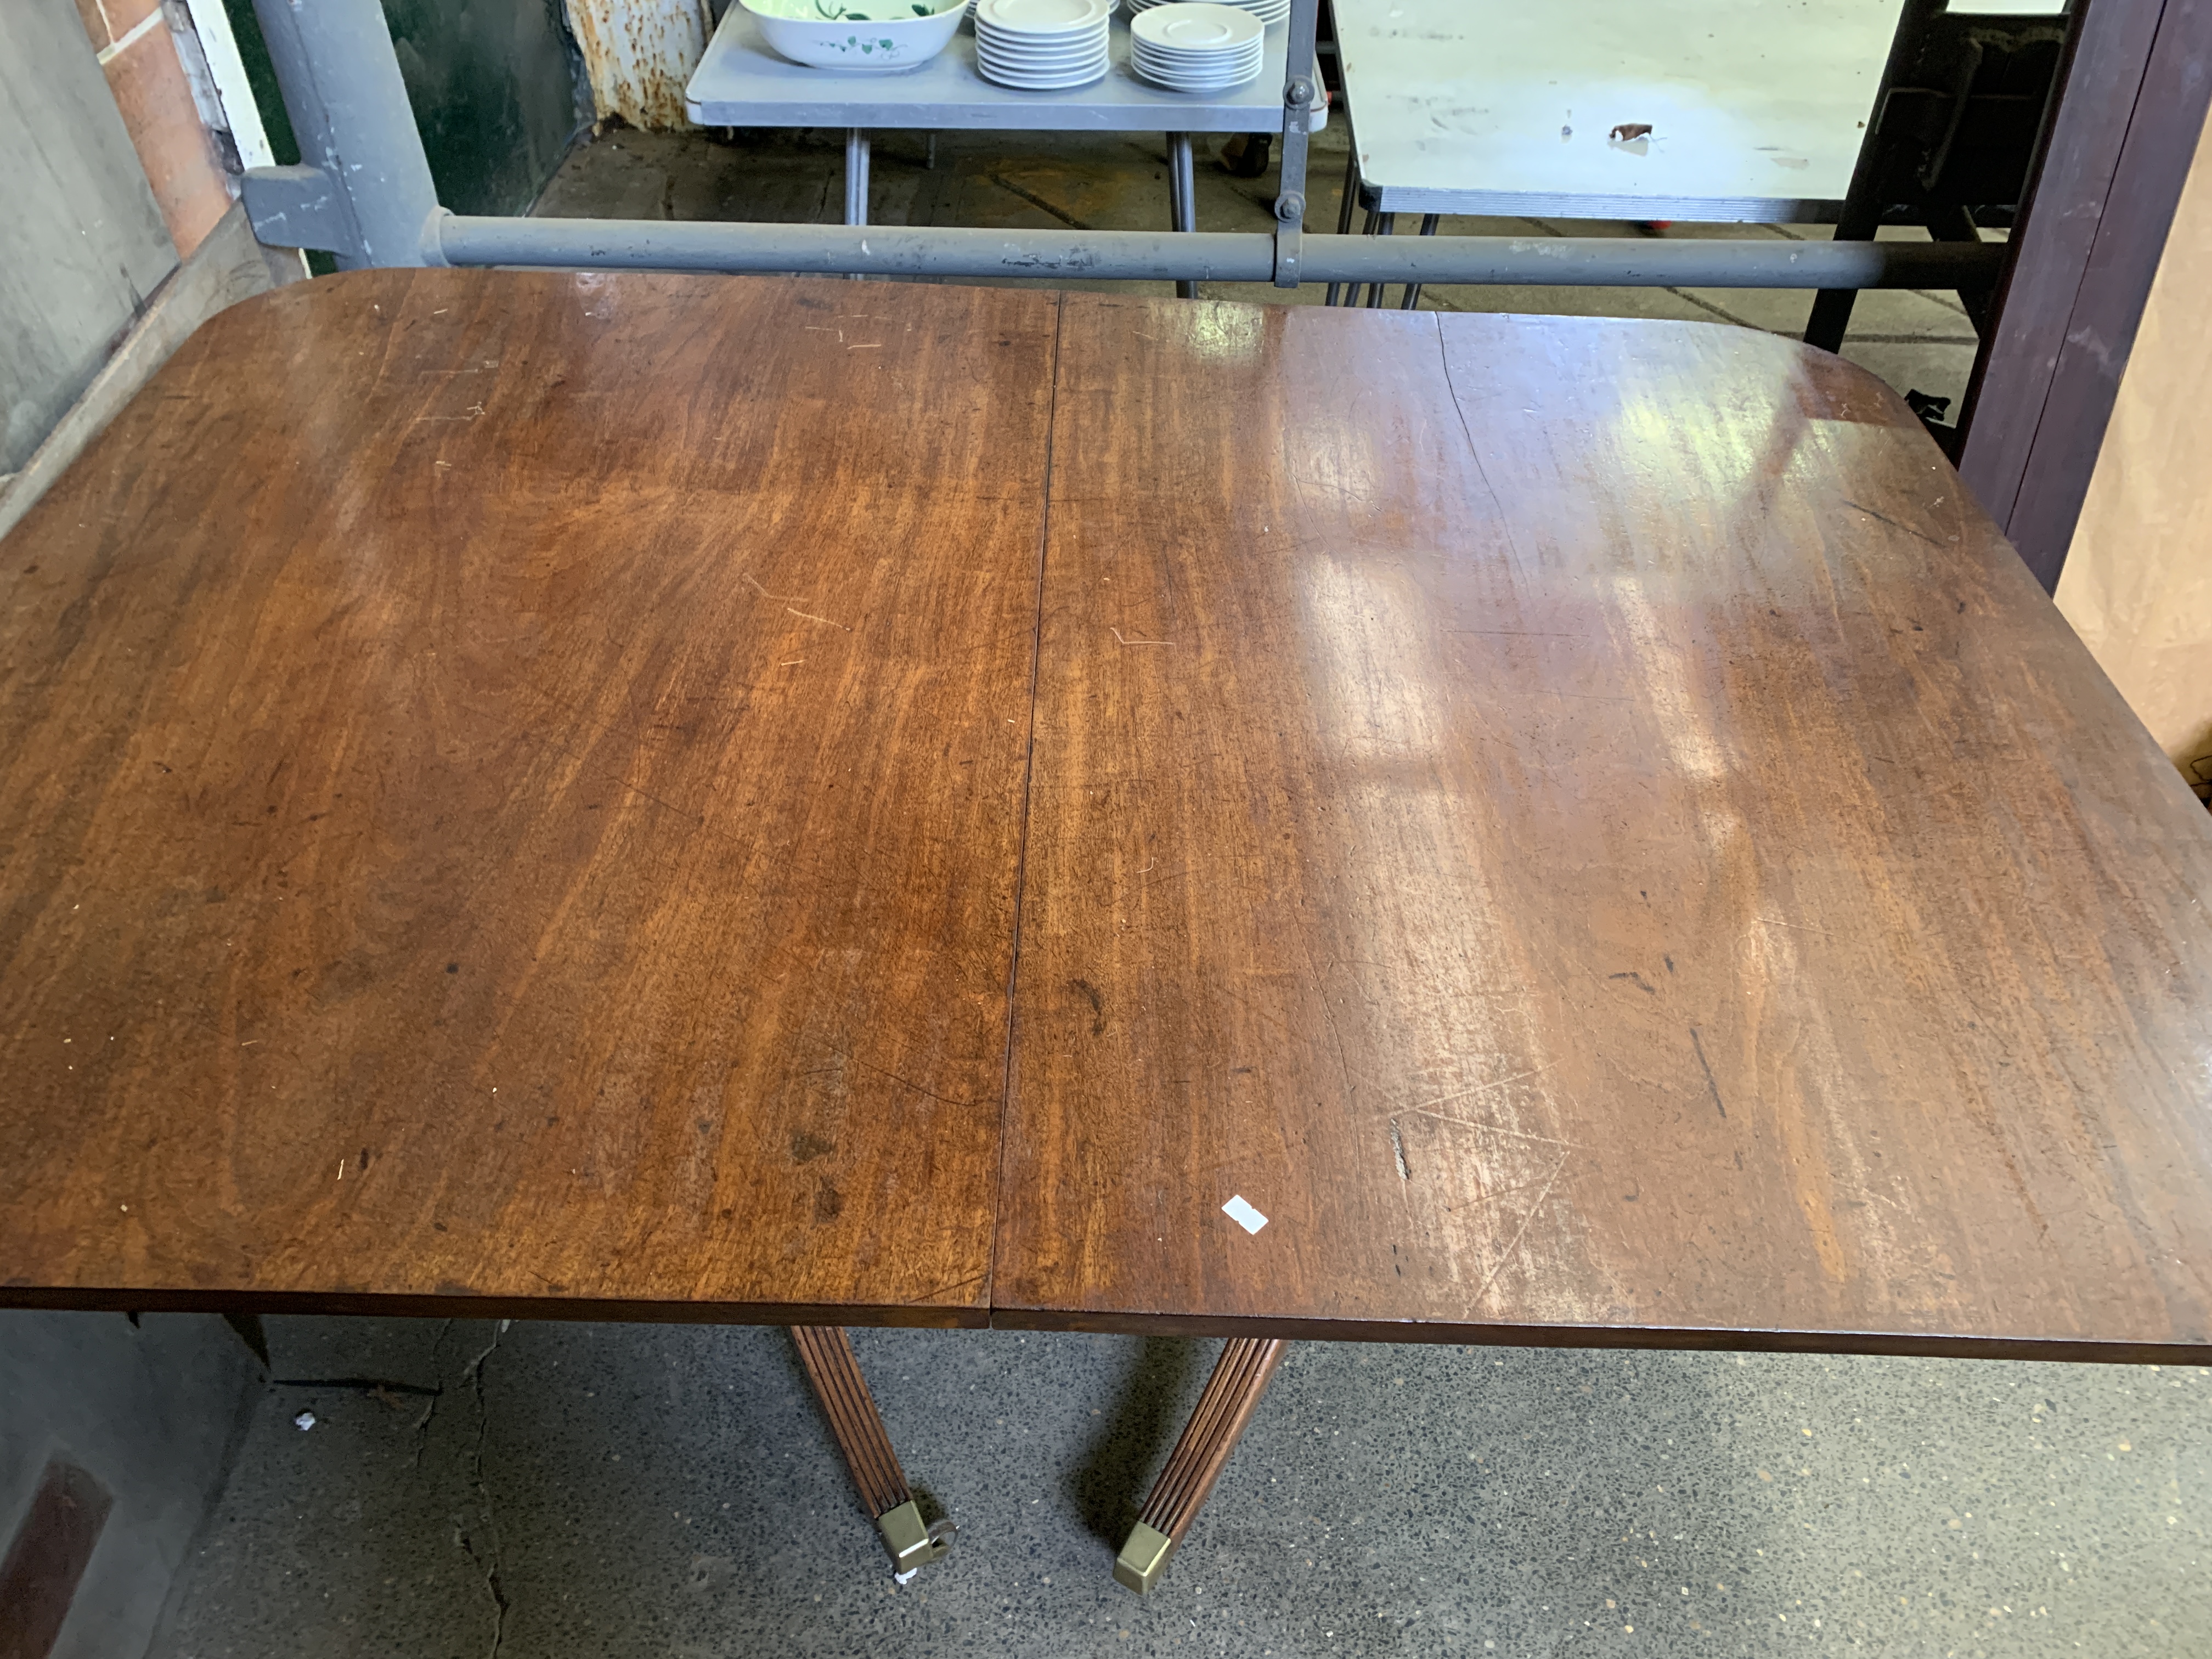 Mahogany extendable pedestal dining table - Image 4 of 7